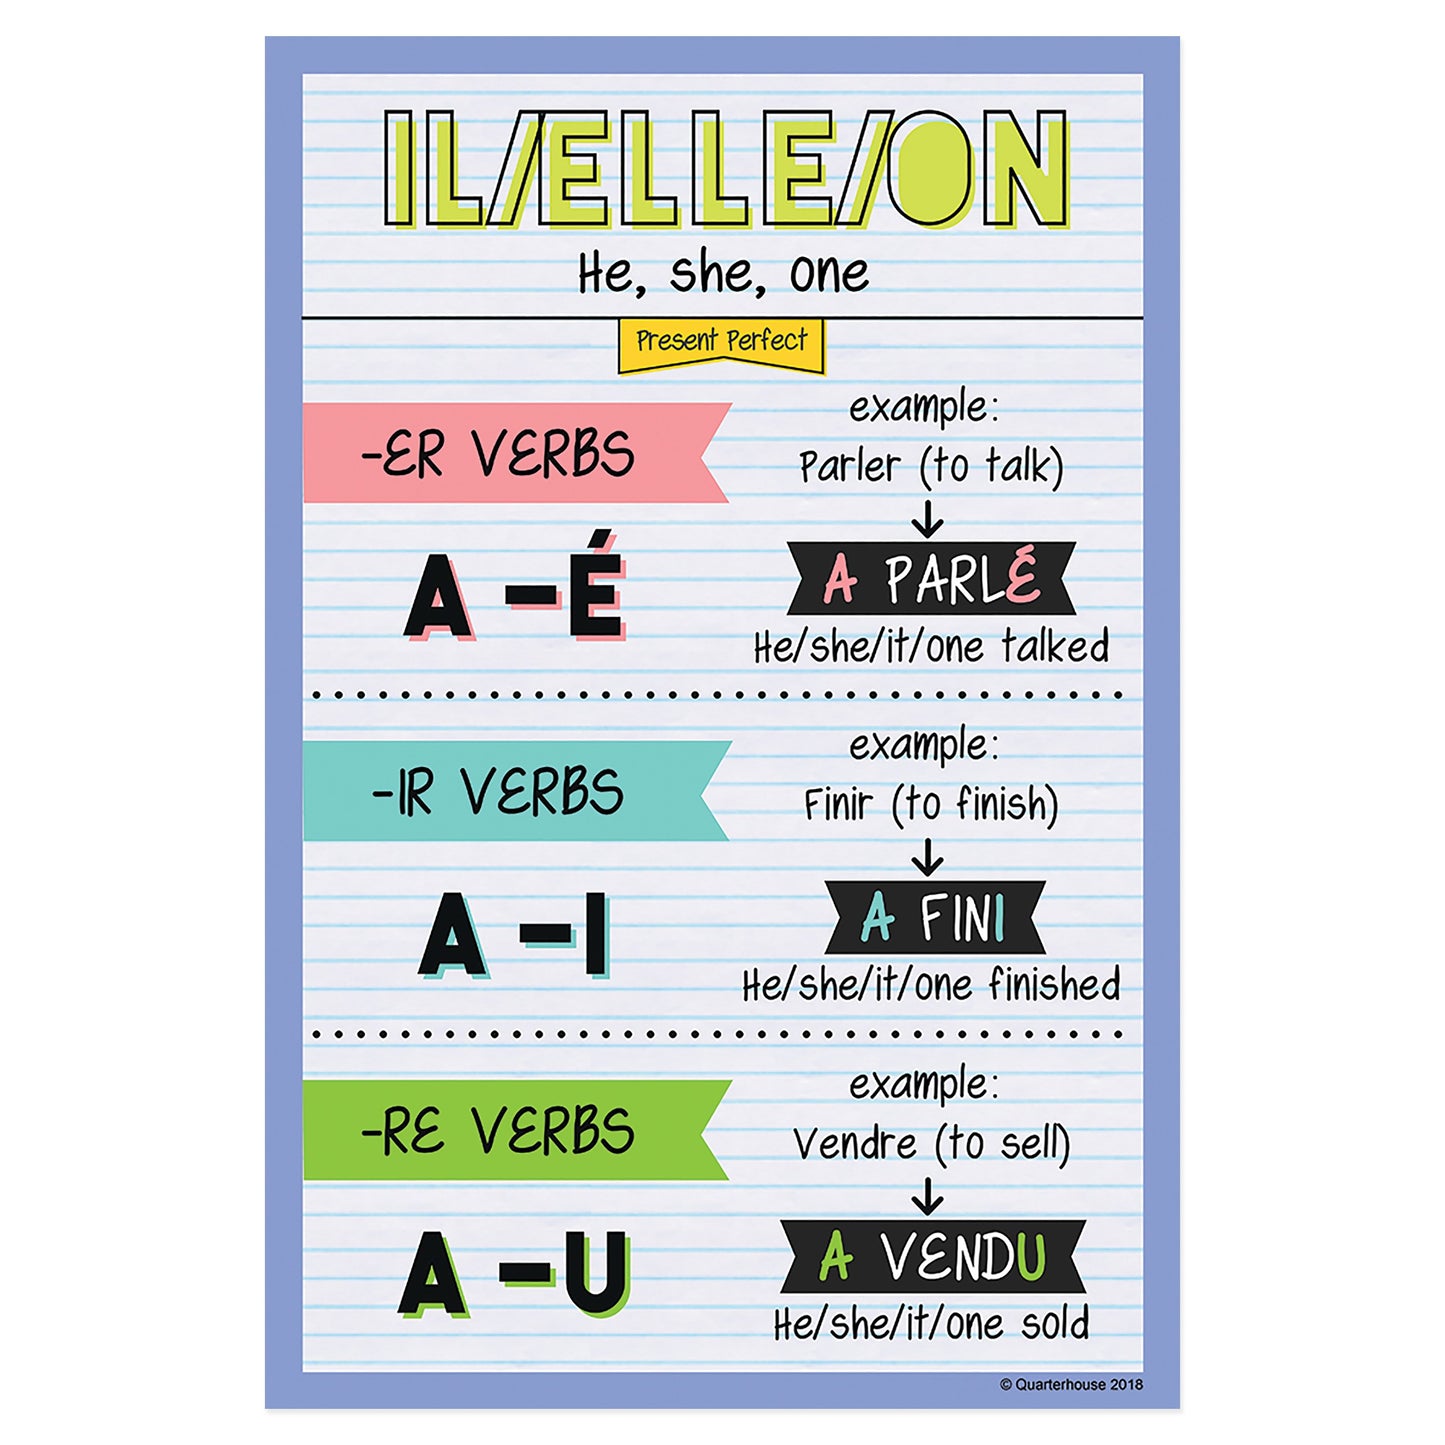 Quarterhouse Il/Elle/On - Past Tense French Verb Conjugation Poster, French and ESL Classroom Materials for Teachers